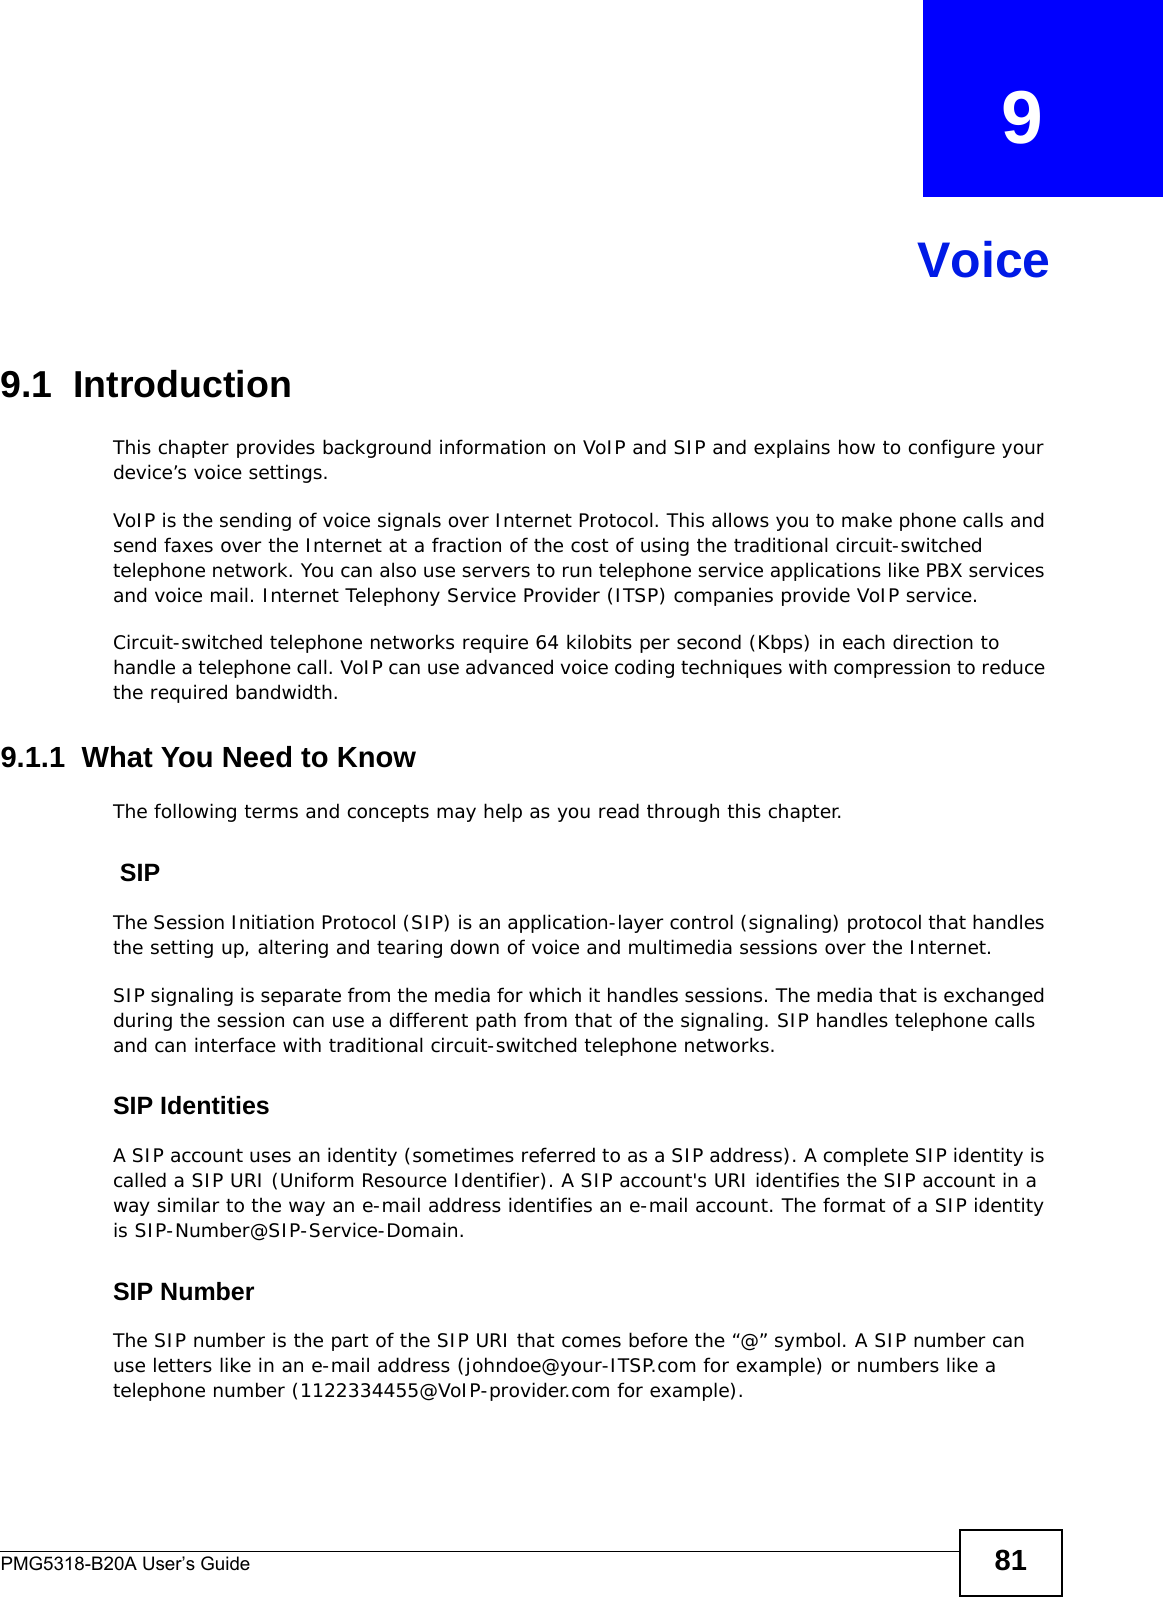 PMG5318-B20A User’s Guide 81CHAPTER   9Voice9.1  Introduction This chapter provides background information on VoIP and SIP and explains how to configure your device’s voice settings.VoIP is the sending of voice signals over Internet Protocol. This allows you to make phone calls and send faxes over the Internet at a fraction of the cost of using the traditional circuit-switched telephone network. You can also use servers to run telephone service applications like PBX services and voice mail. Internet Telephony Service Provider (ITSP) companies provide VoIP service. Circuit-switched telephone networks require 64 kilobits per second (Kbps) in each direction to handle a telephone call. VoIP can use advanced voice coding techniques with compression to reduce the required bandwidth. 9.1.1  What You Need to KnowThe following terms and concepts may help as you read through this chapter. SIPThe Session Initiation Protocol (SIP) is an application-layer control (signaling) protocol that handles the setting up, altering and tearing down of voice and multimedia sessions over the Internet.SIP signaling is separate from the media for which it handles sessions. The media that is exchanged during the session can use a different path from that of the signaling. SIP handles telephone calls and can interface with traditional circuit-switched telephone networks.SIP IdentitiesA SIP account uses an identity (sometimes referred to as a SIP address). A complete SIP identity is called a SIP URI (Uniform Resource Identifier). A SIP account&apos;s URI identifies the SIP account in a way similar to the way an e-mail address identifies an e-mail account. The format of a SIP identity is SIP-Number@SIP-Service-Domain.SIP NumberThe SIP number is the part of the SIP URI that comes before the “@” symbol. A SIP number can use letters like in an e-mail address (johndoe@your-ITSP.com for example) or numbers like a telephone number (1122334455@VoIP-provider.com for example).